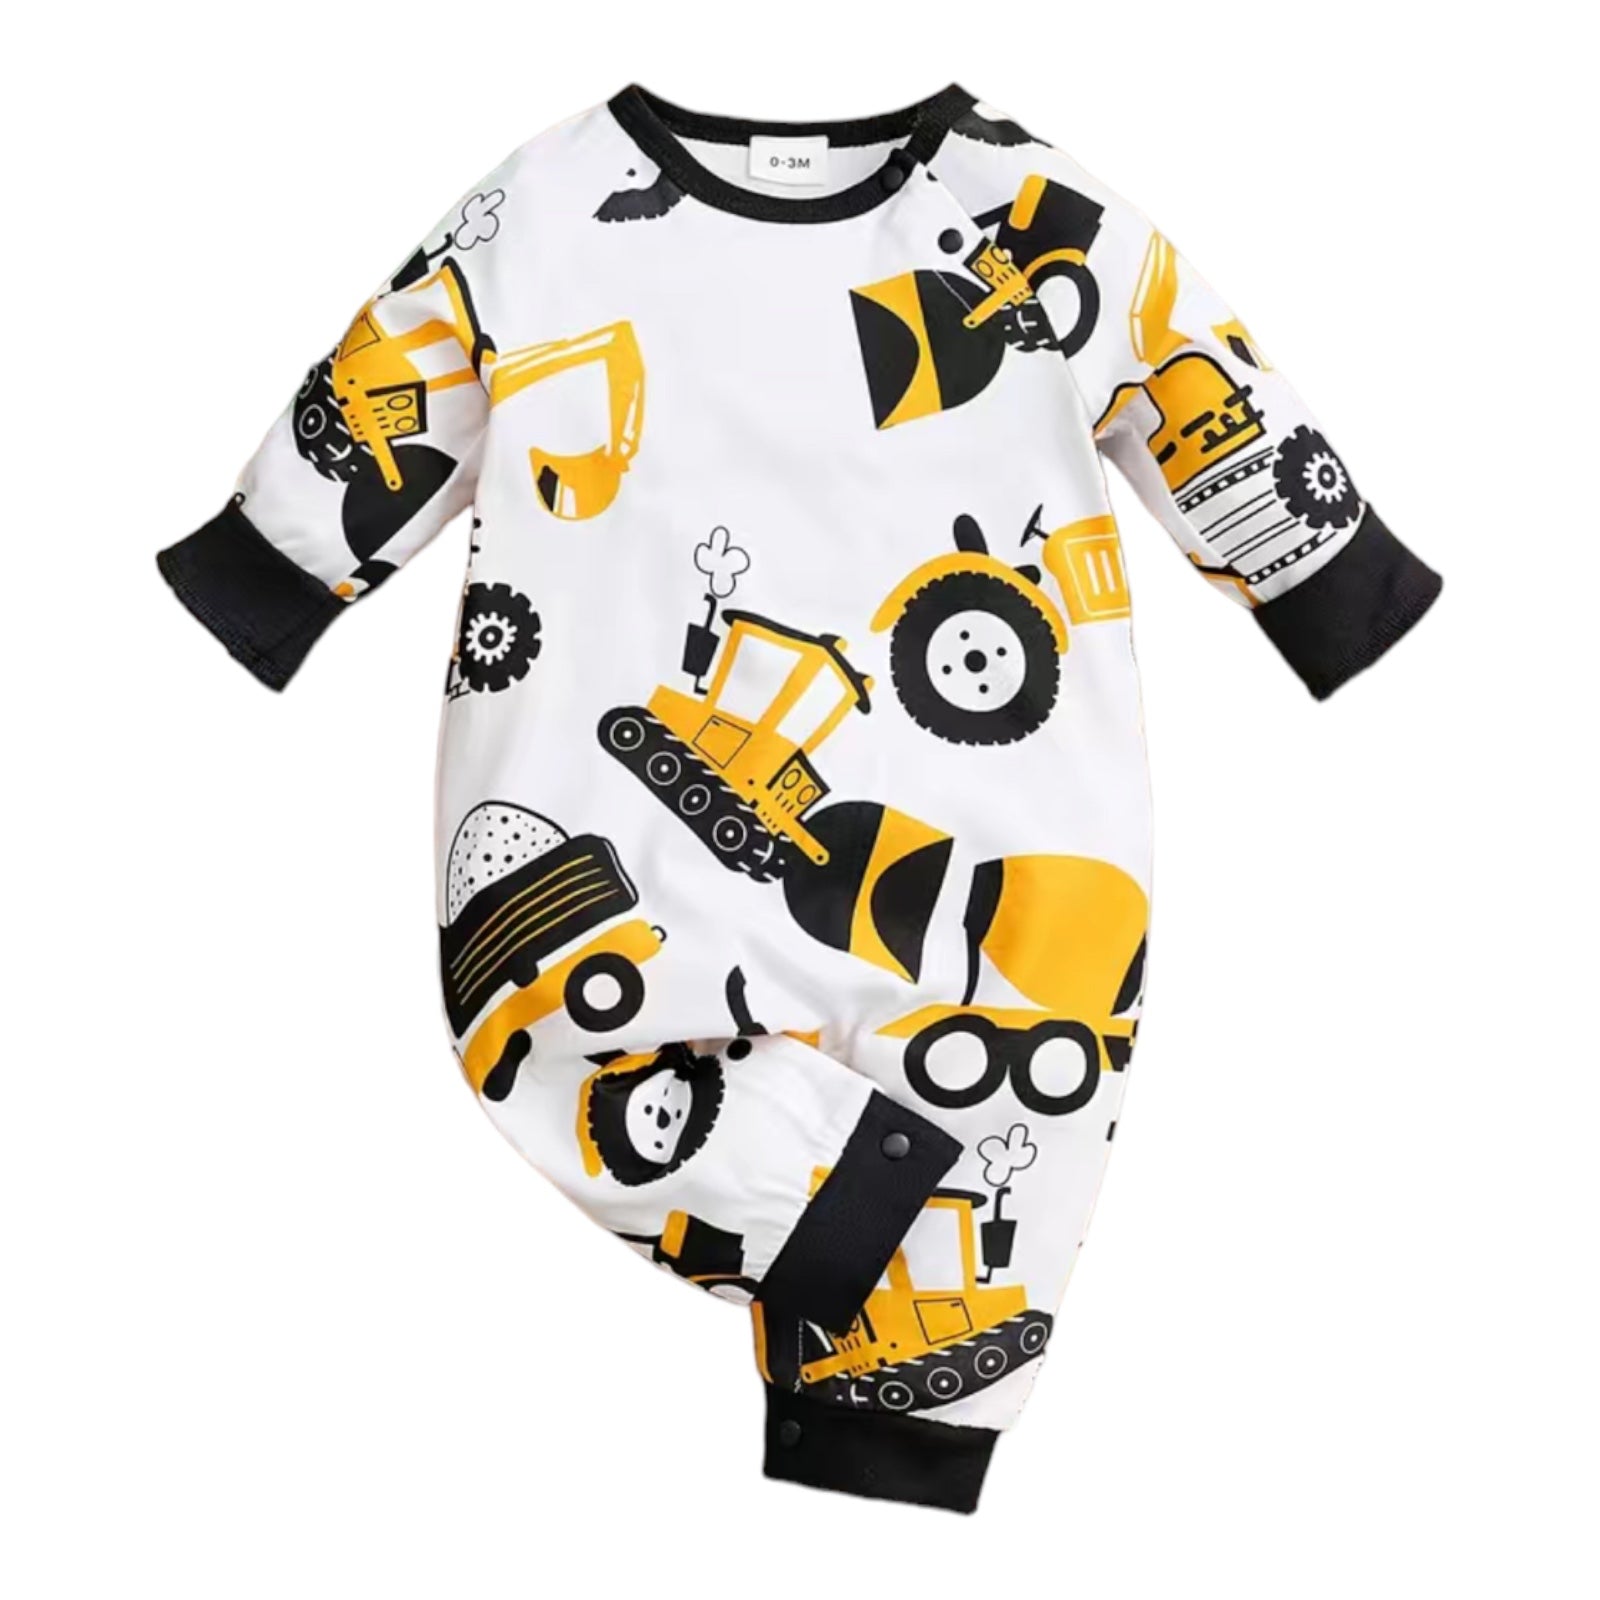 Machinery Baby Outfit